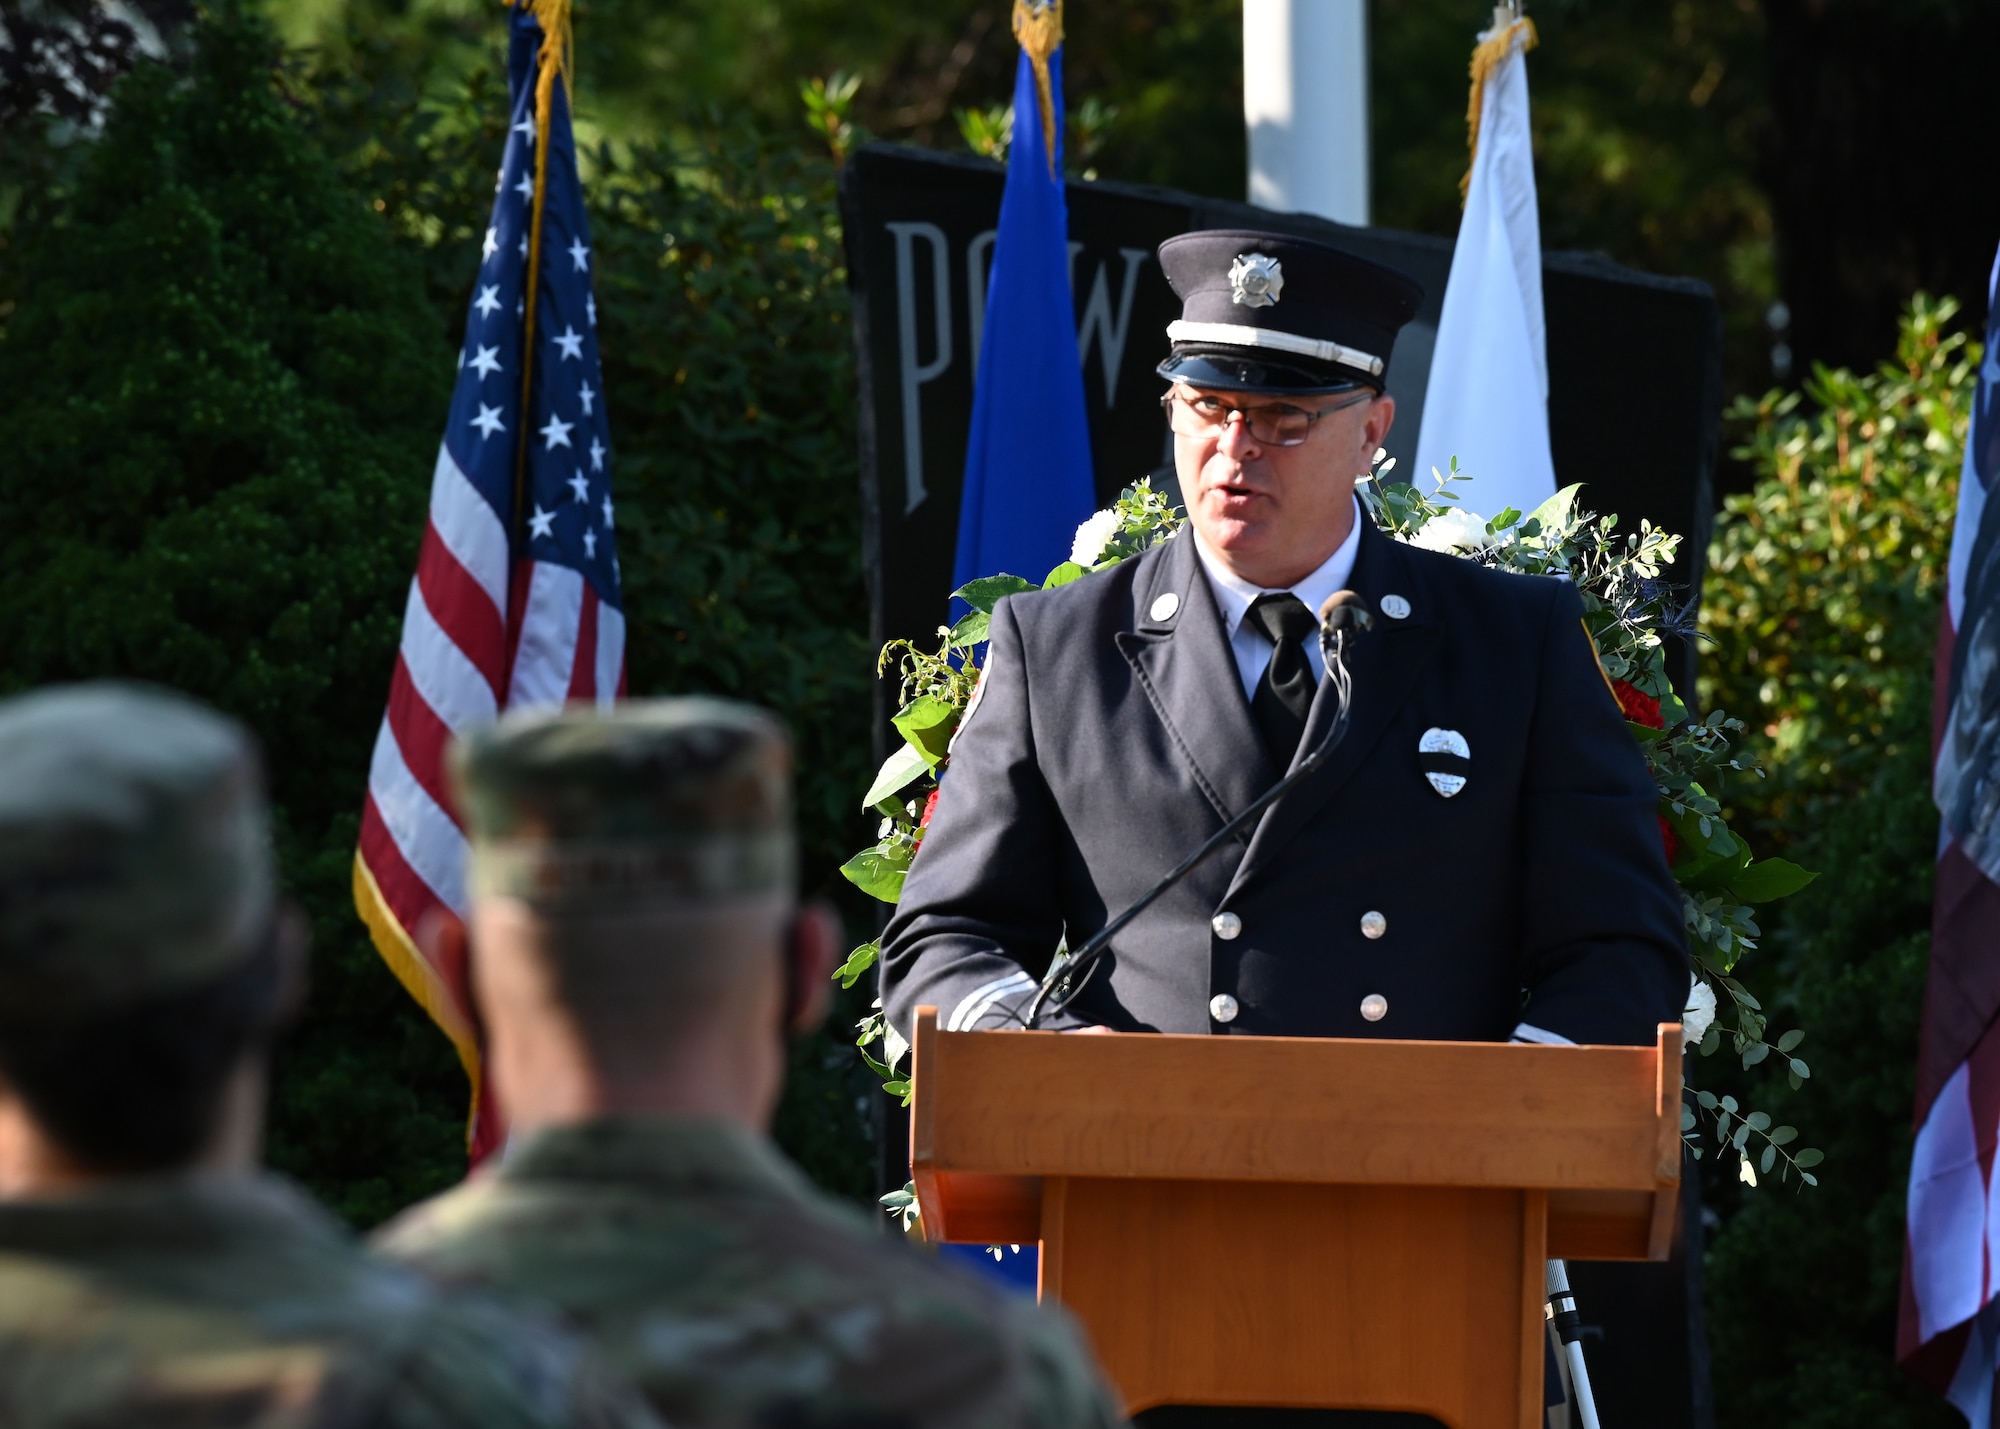 Hanscom Fire Captain Dale Smith speaks during a 9/11 remembrance ceremony